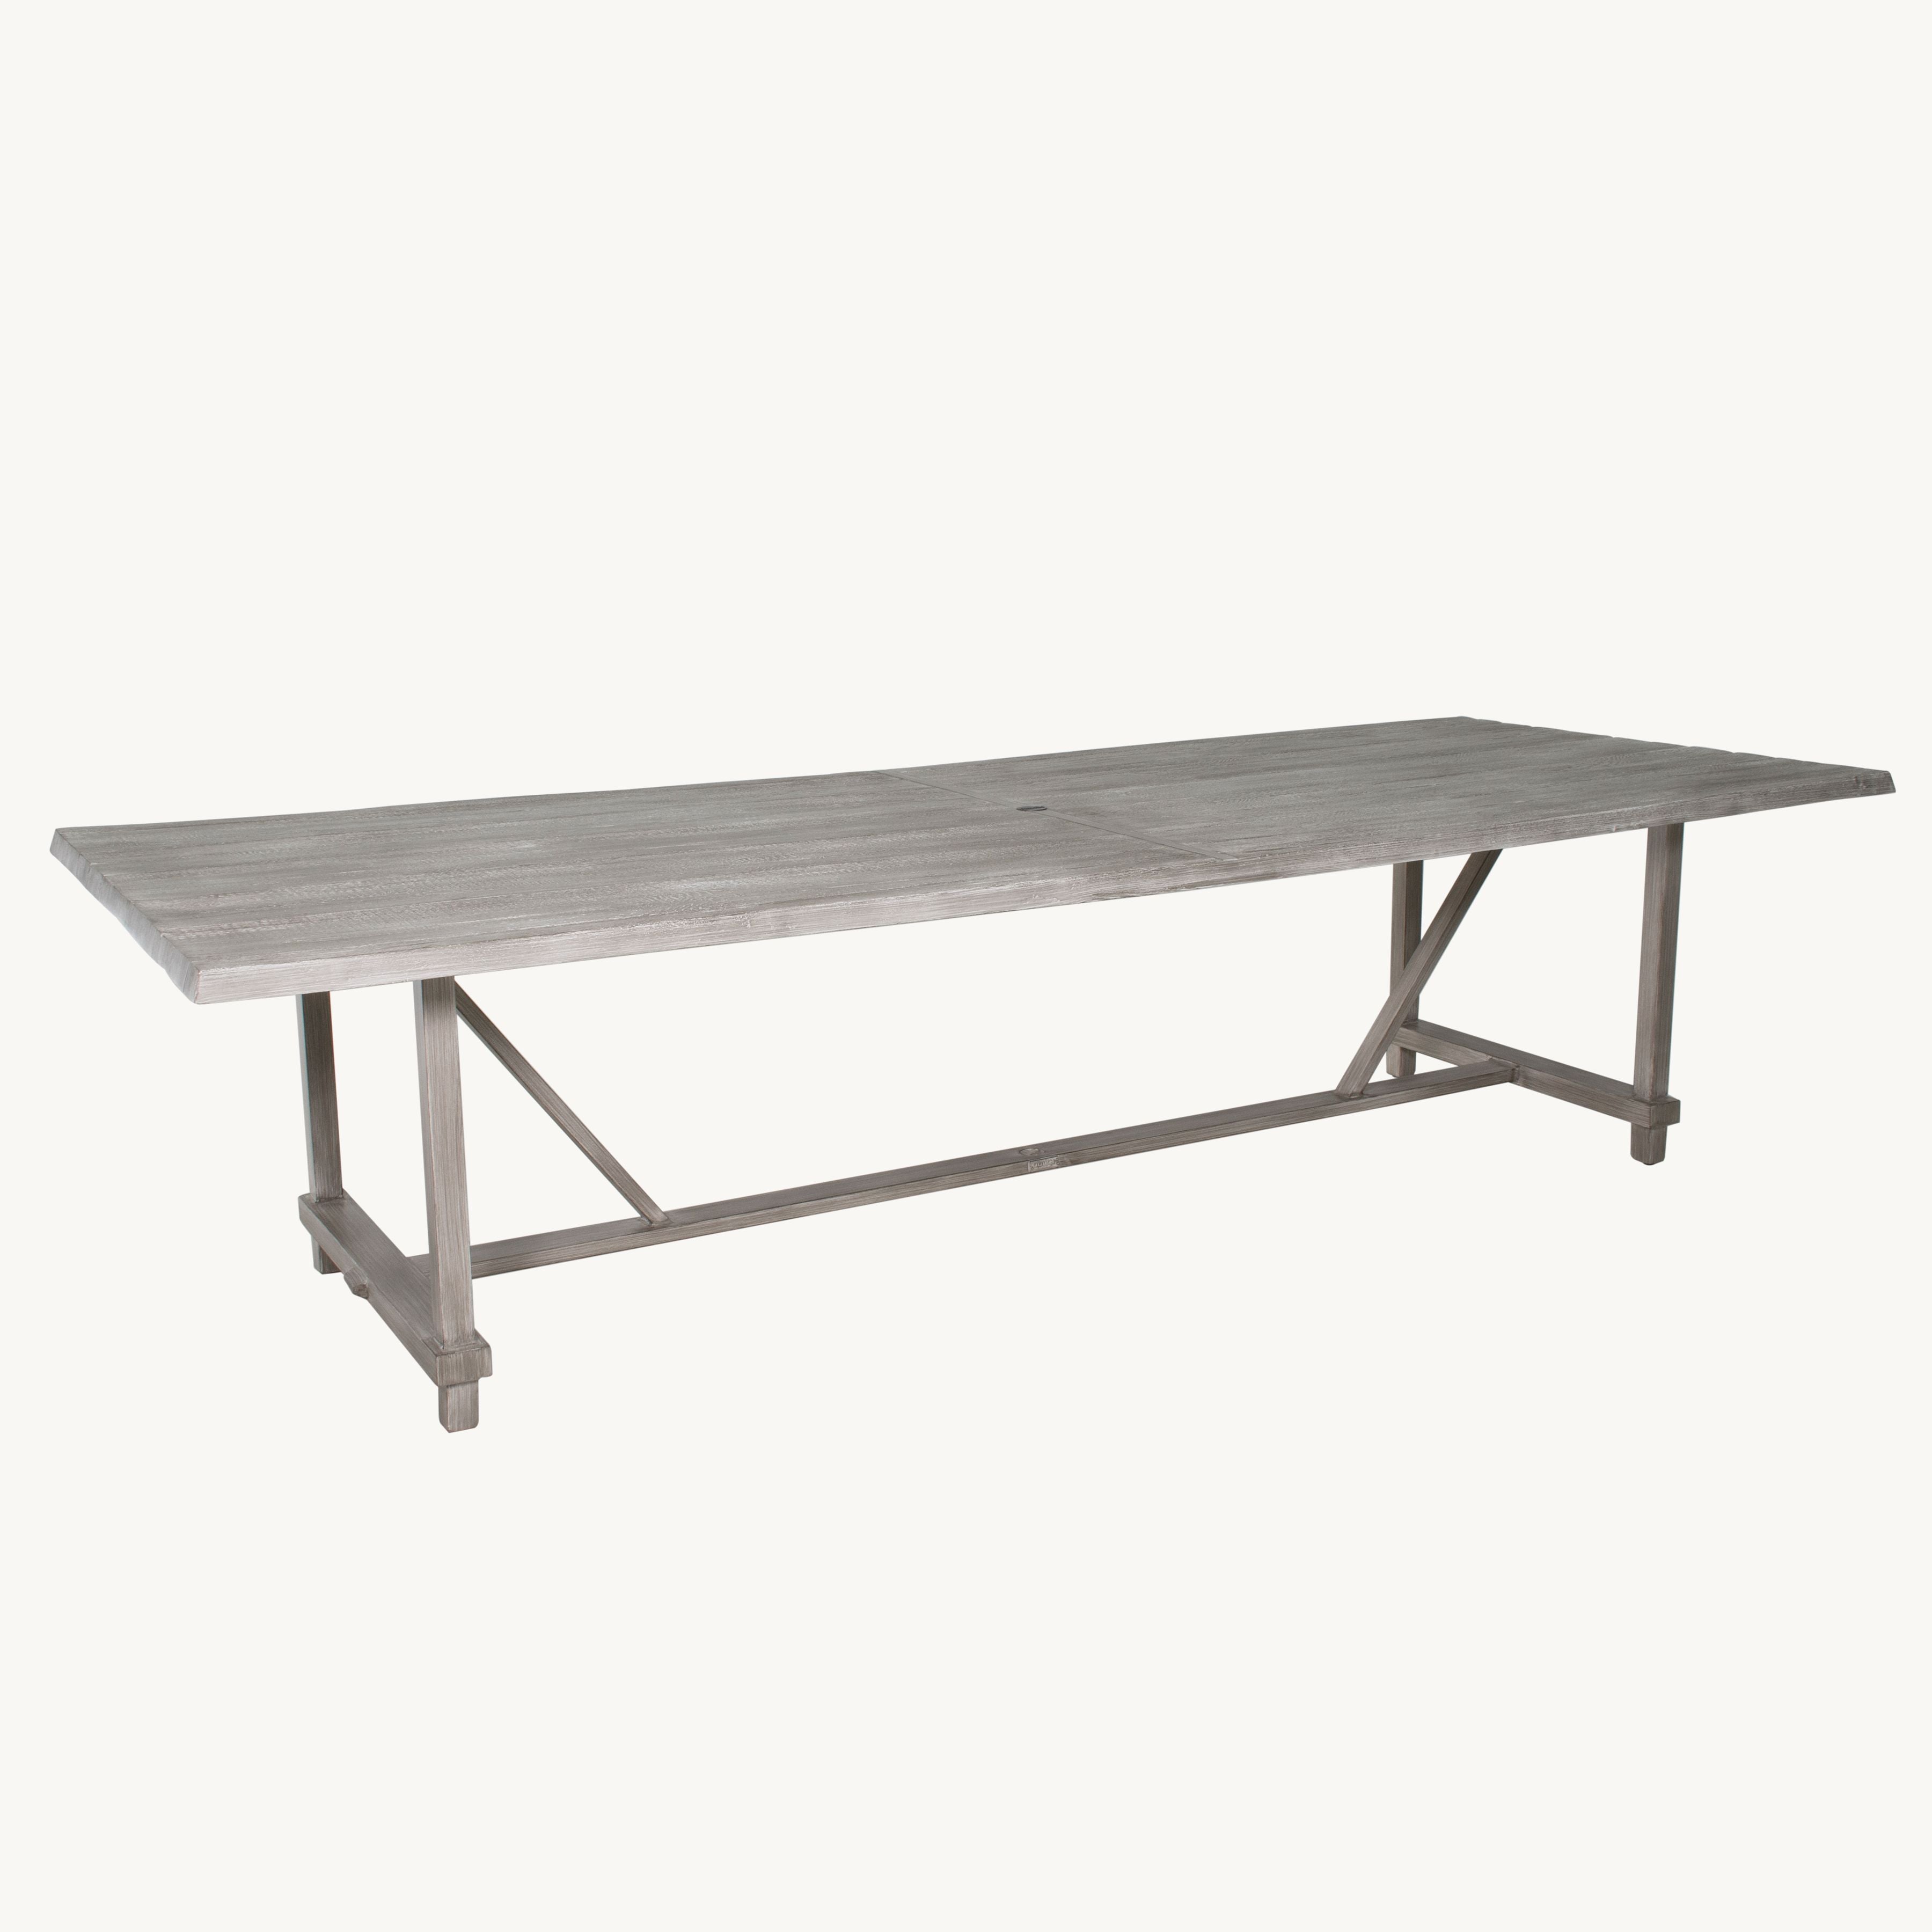 Antler Hill 44" X 116" Rectangular Dining Table By Castelle